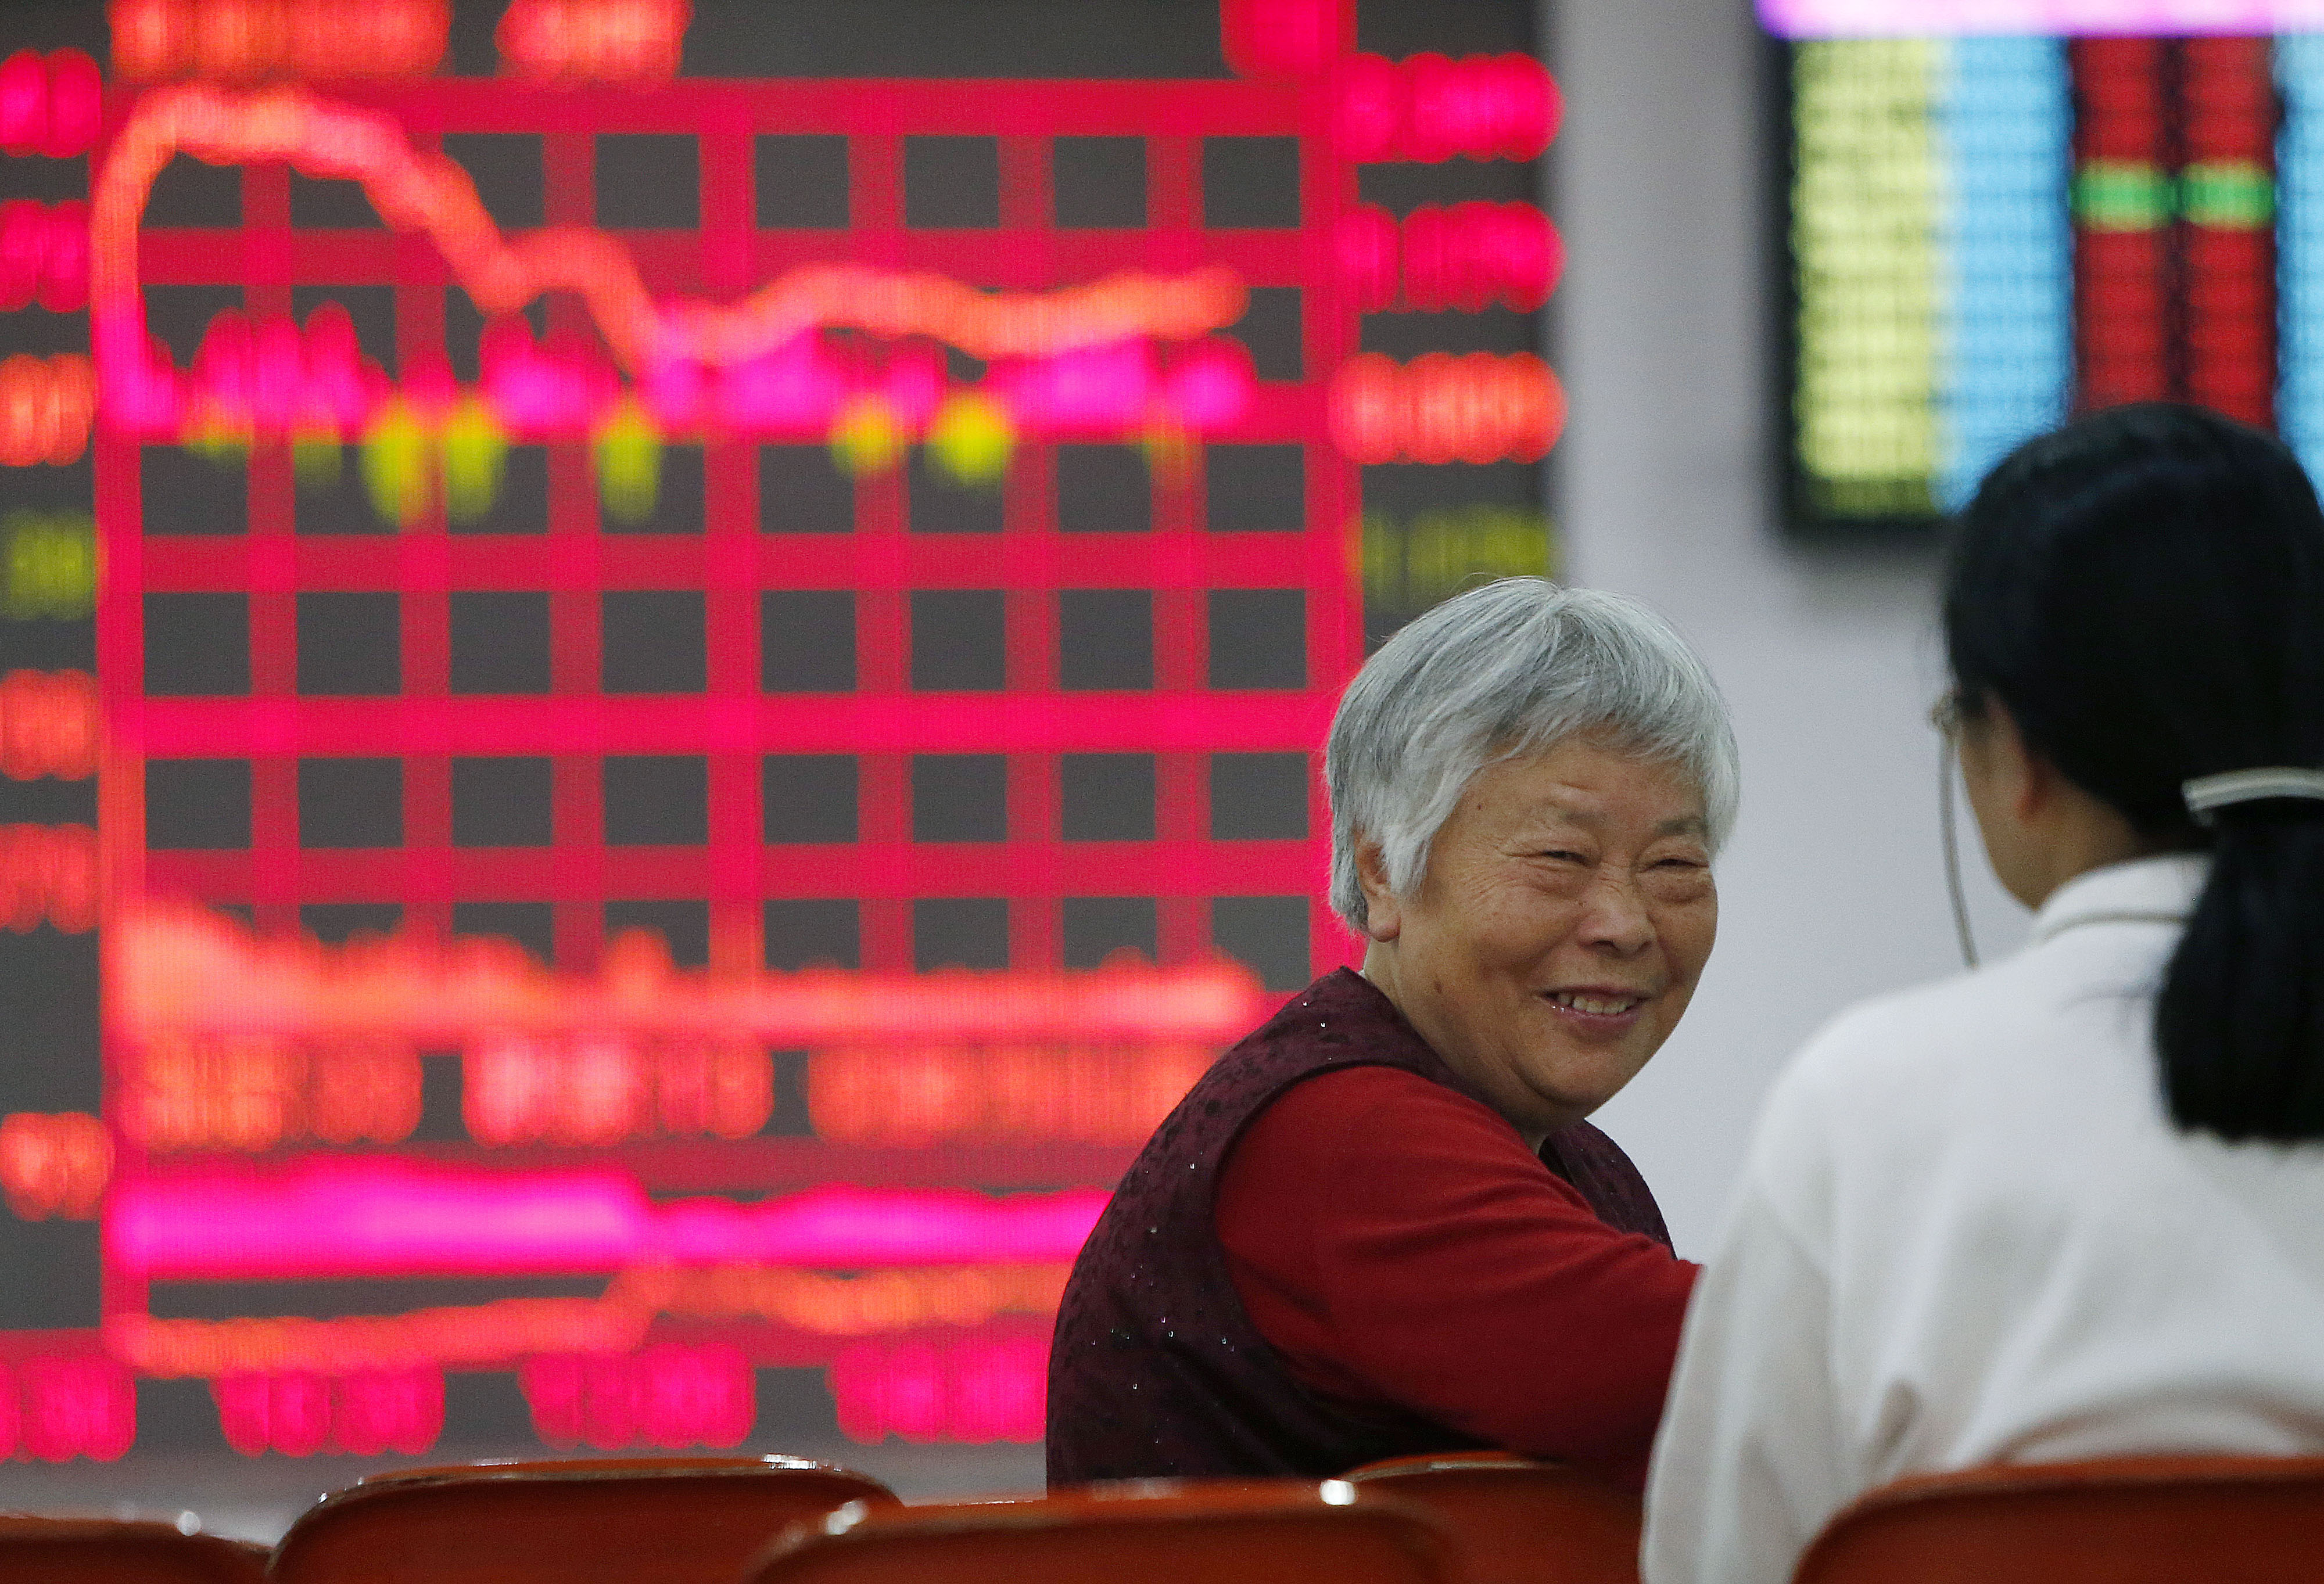 Investors watch the performance of stocks in China as the country's pension fund said it would pump up to 30 per cent of its net assets into equity investments. Photo: Xinhua